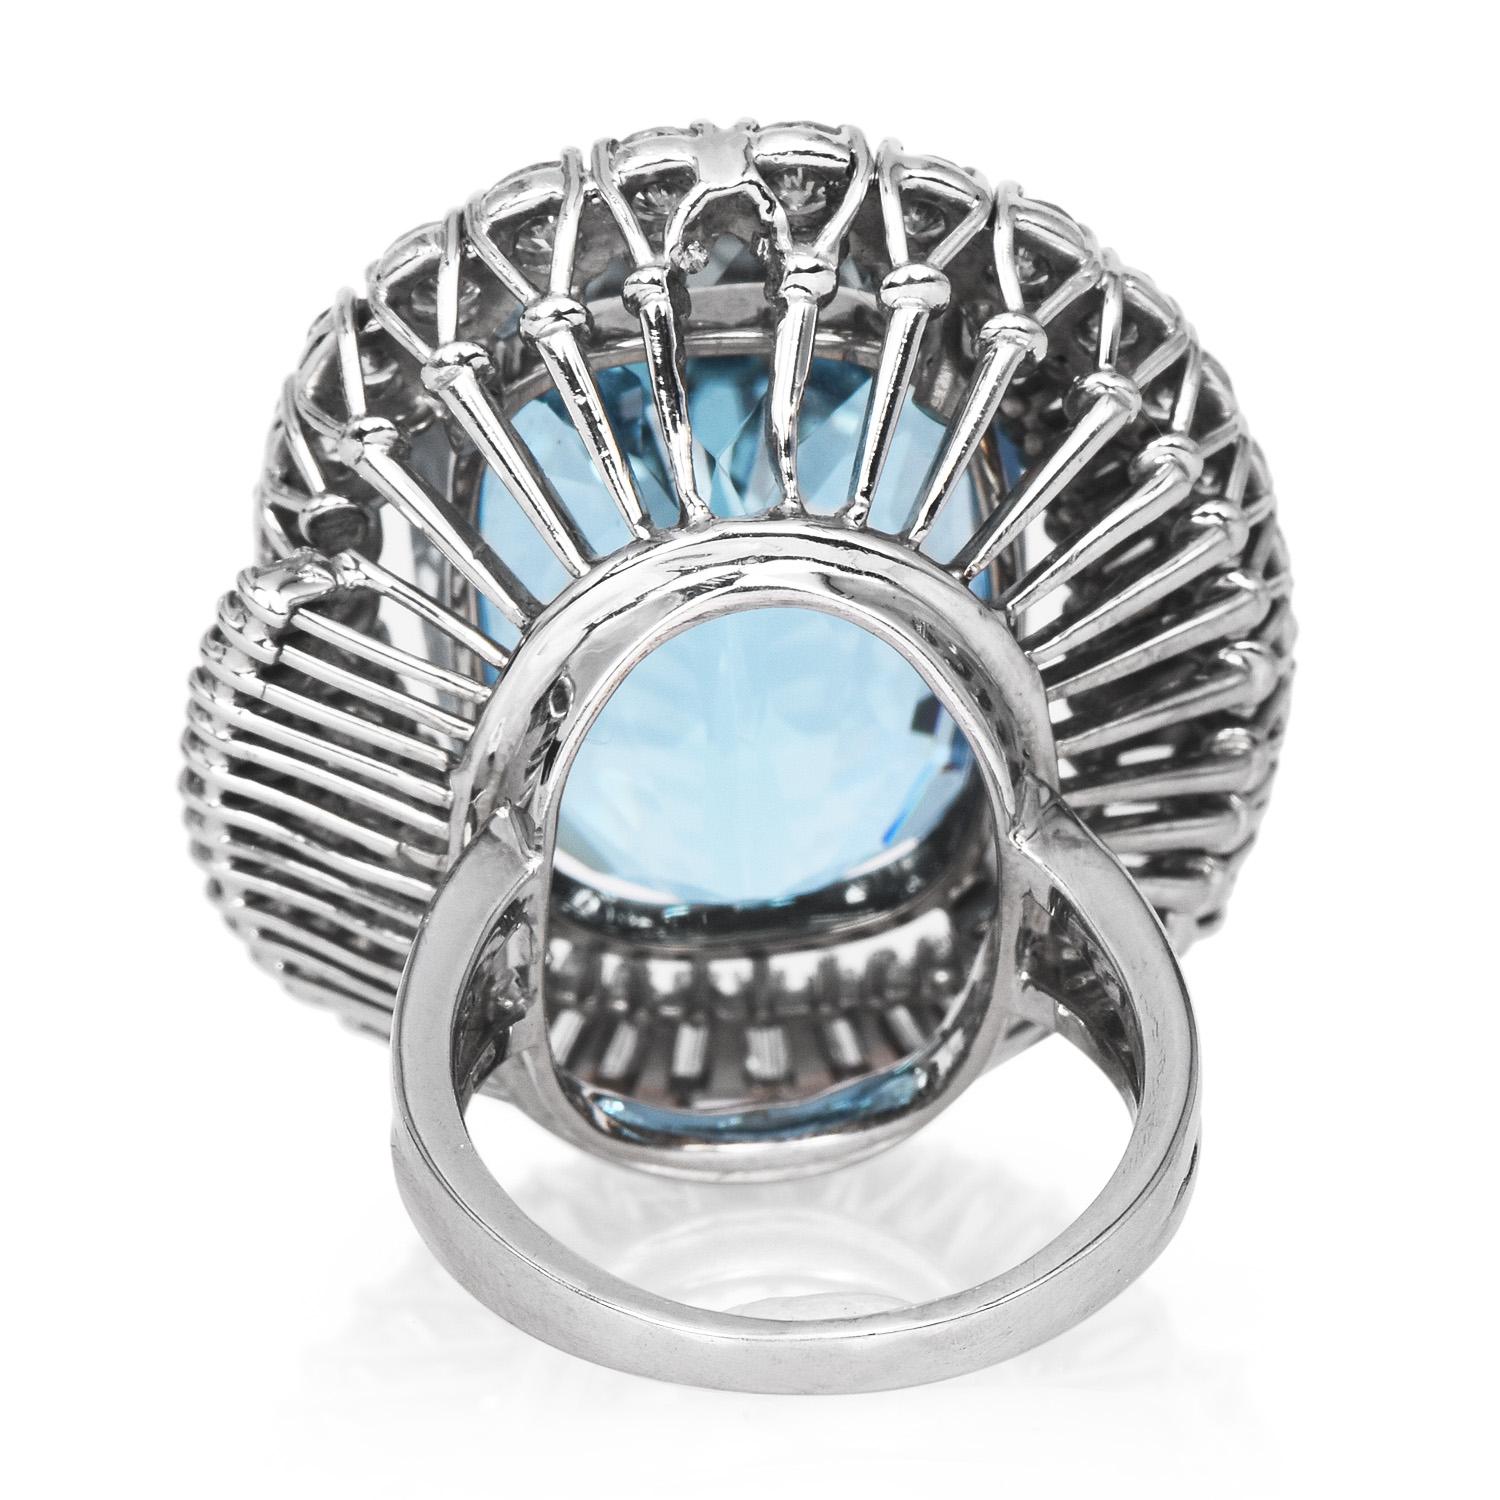 H-Stern Vintage 23.07 GIA Aquamarine Diamond Platinum Gold Cocktail Ring In Excellent Condition For Sale In Miami, FL